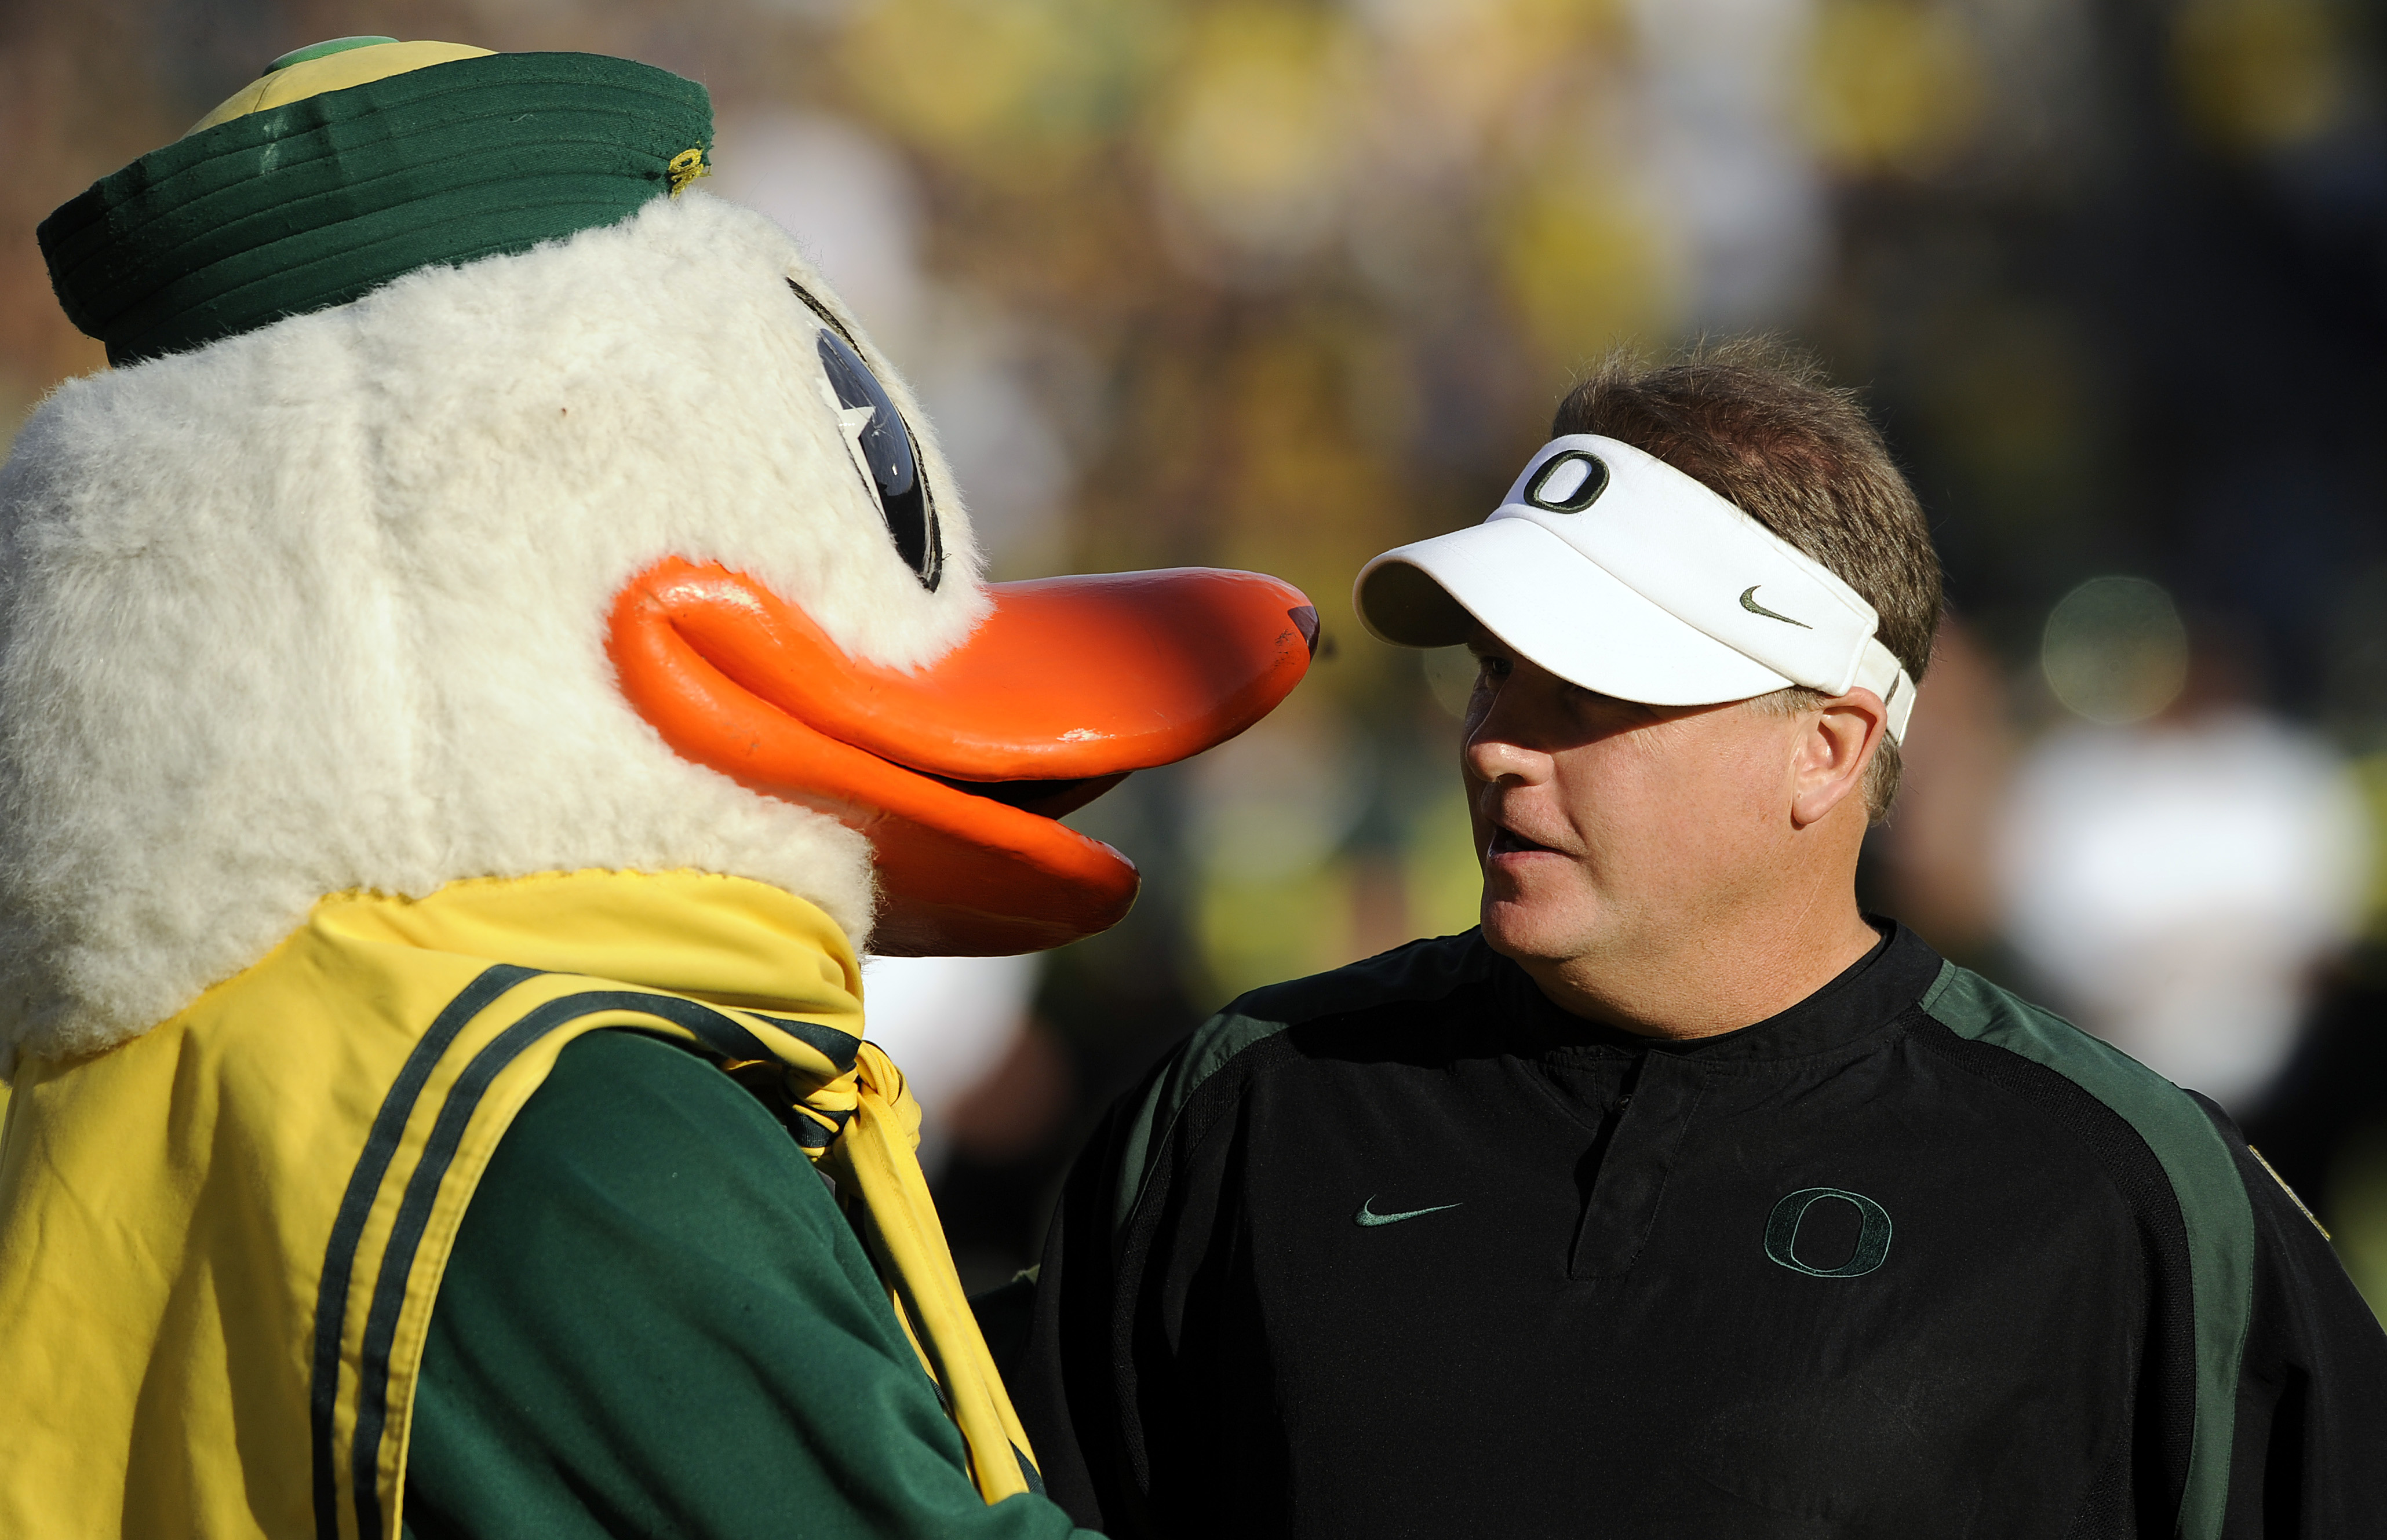 EUGENE, OR - OCTOBER 2: Head coach Chip Kelly of the Oregon Ducks is greeted by 'Puddles', the mascot of the Oregon Ducks, before the game against the Stanford Cardinal at Autzen Stadium on October 2, 2010 in Eugene, Oregon. Oregon won the game 52-31. (Ph